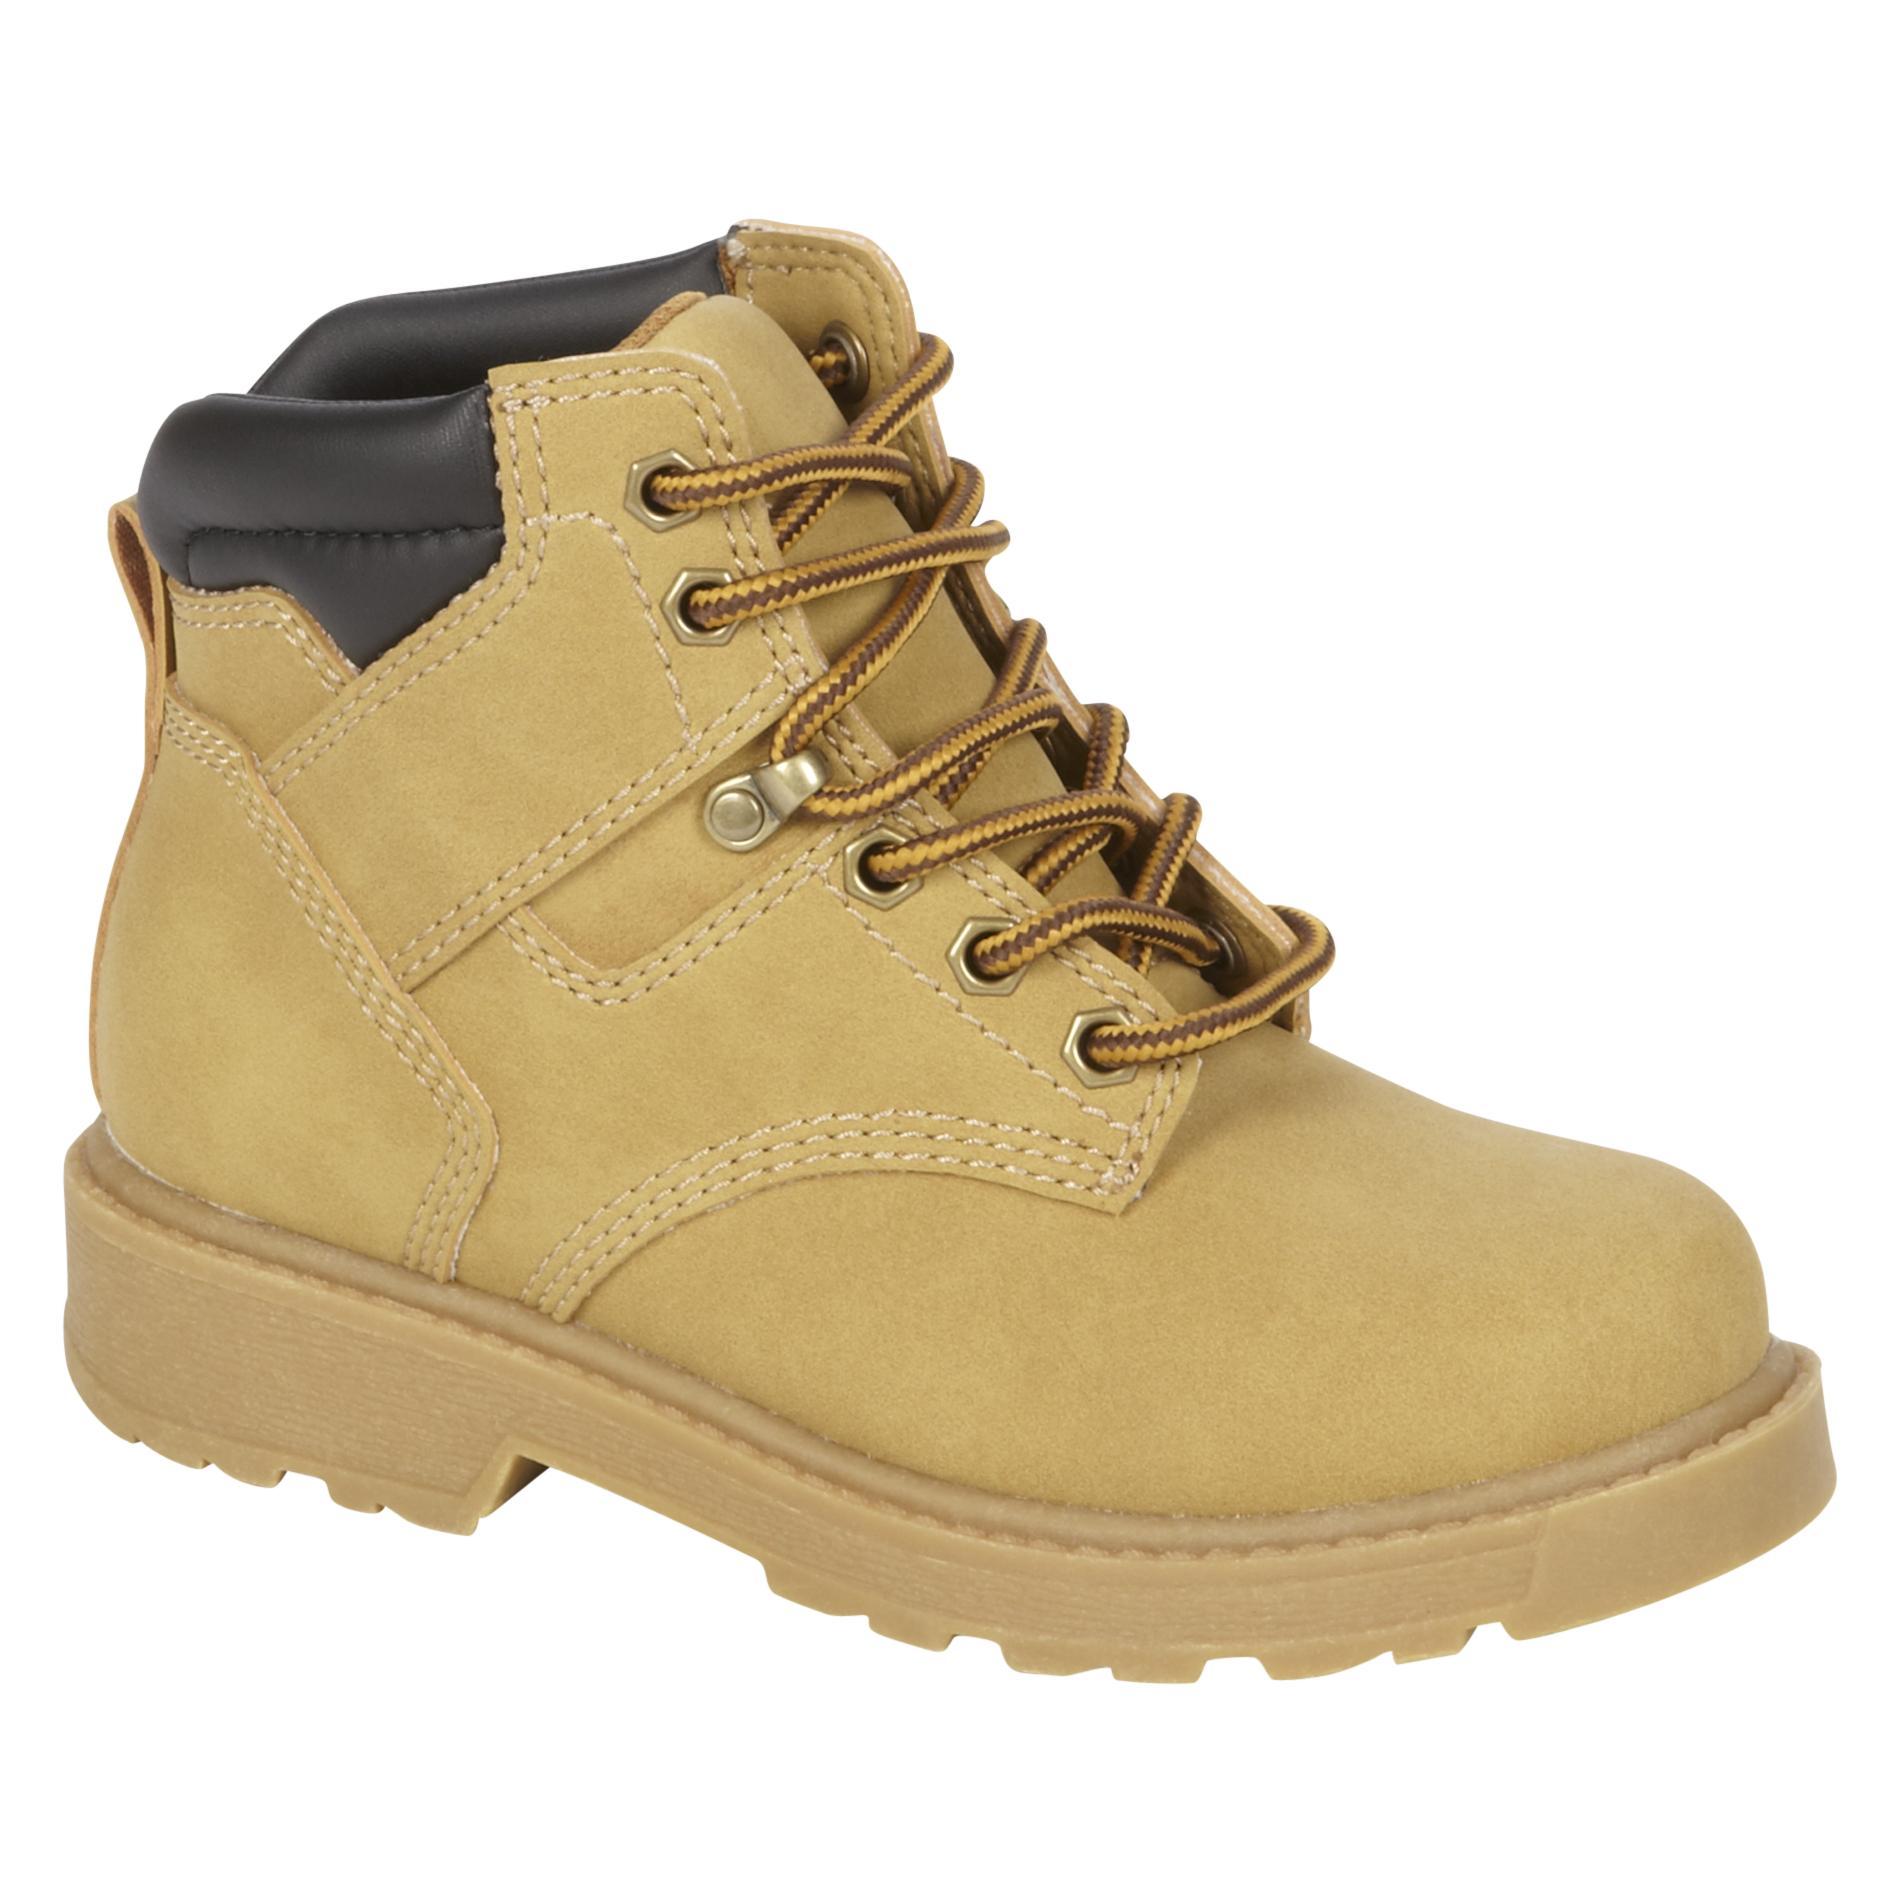 Route 66 Boy's Work Boot Abe - Wheat